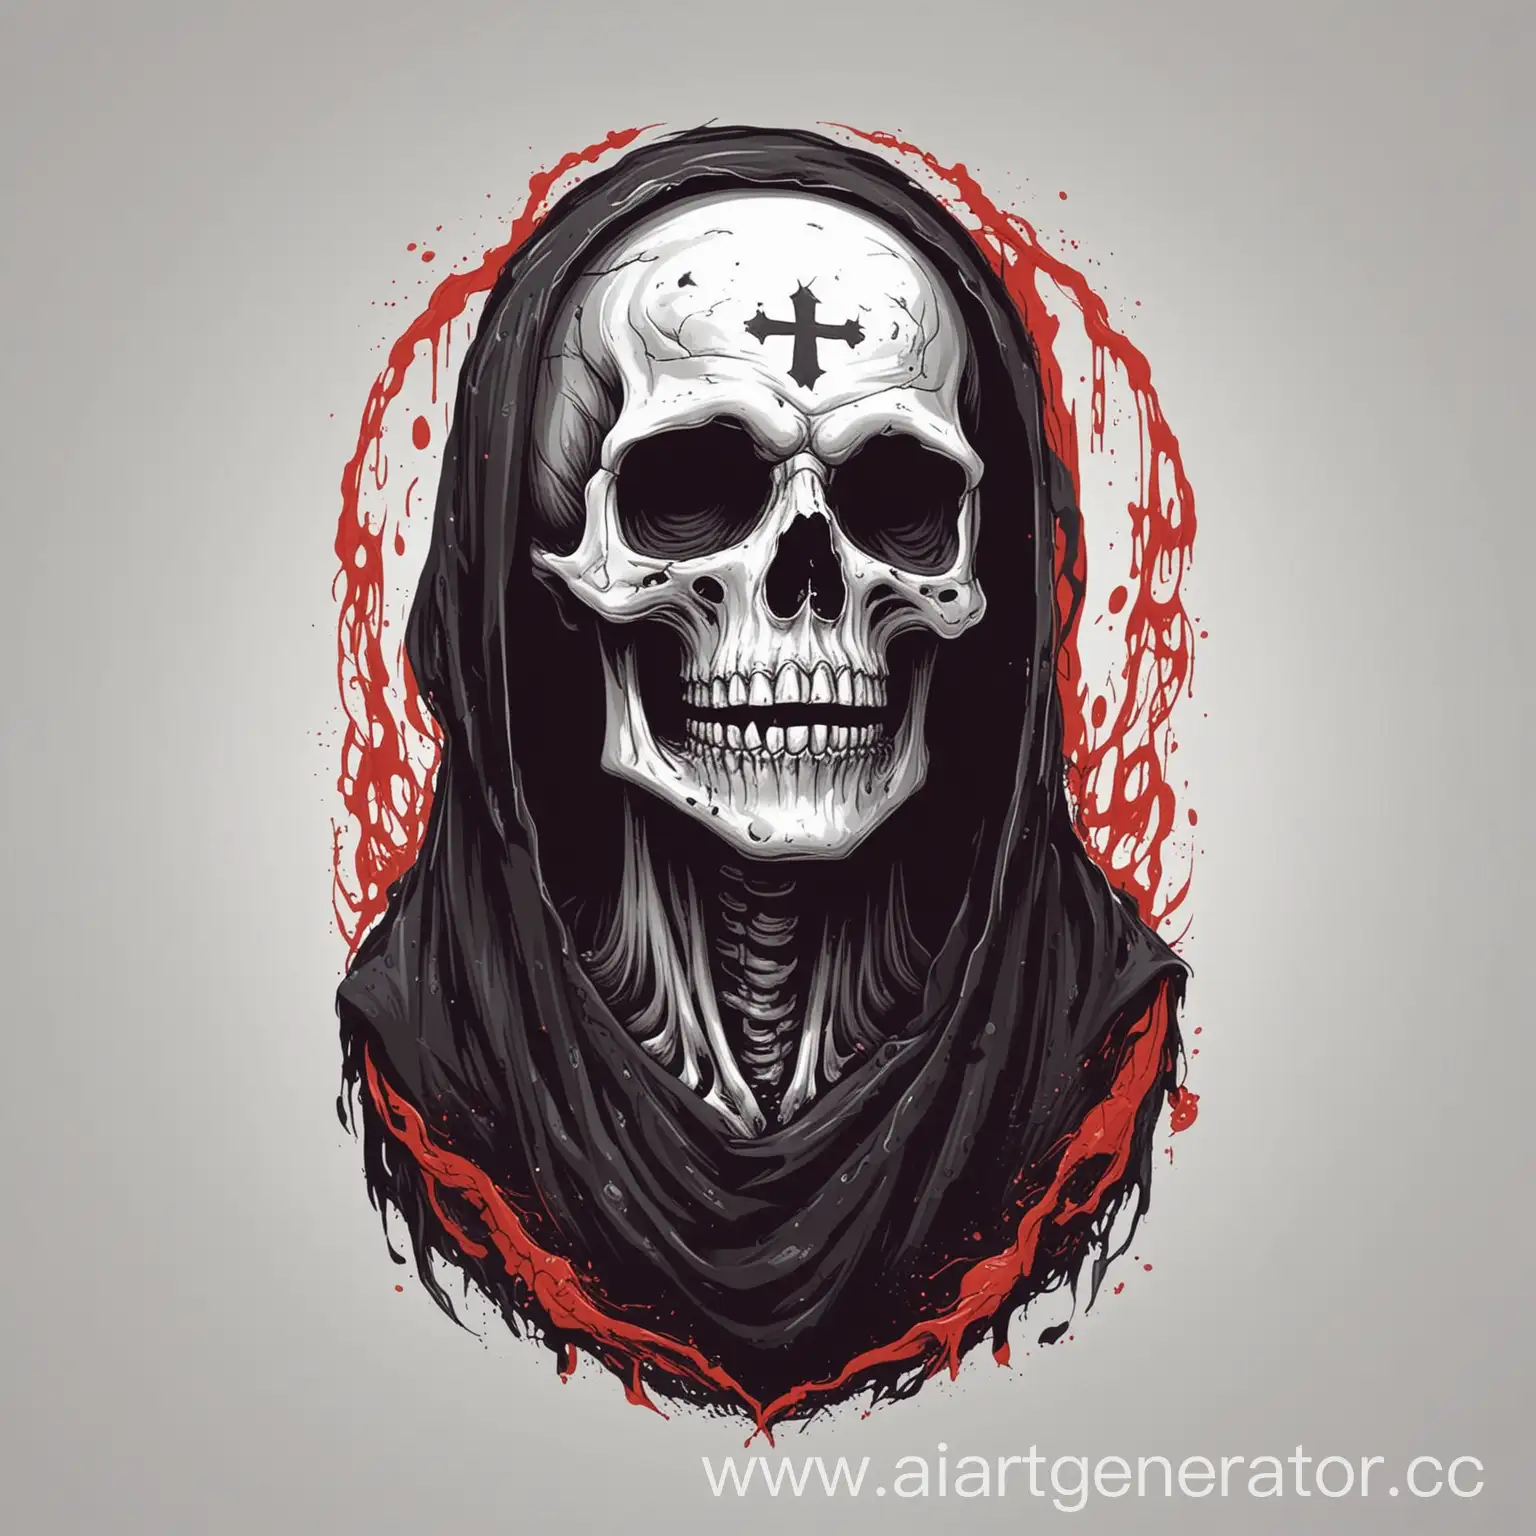 Ethereal-Depiction-of-Death-Vector-Illustration-on-White-Background